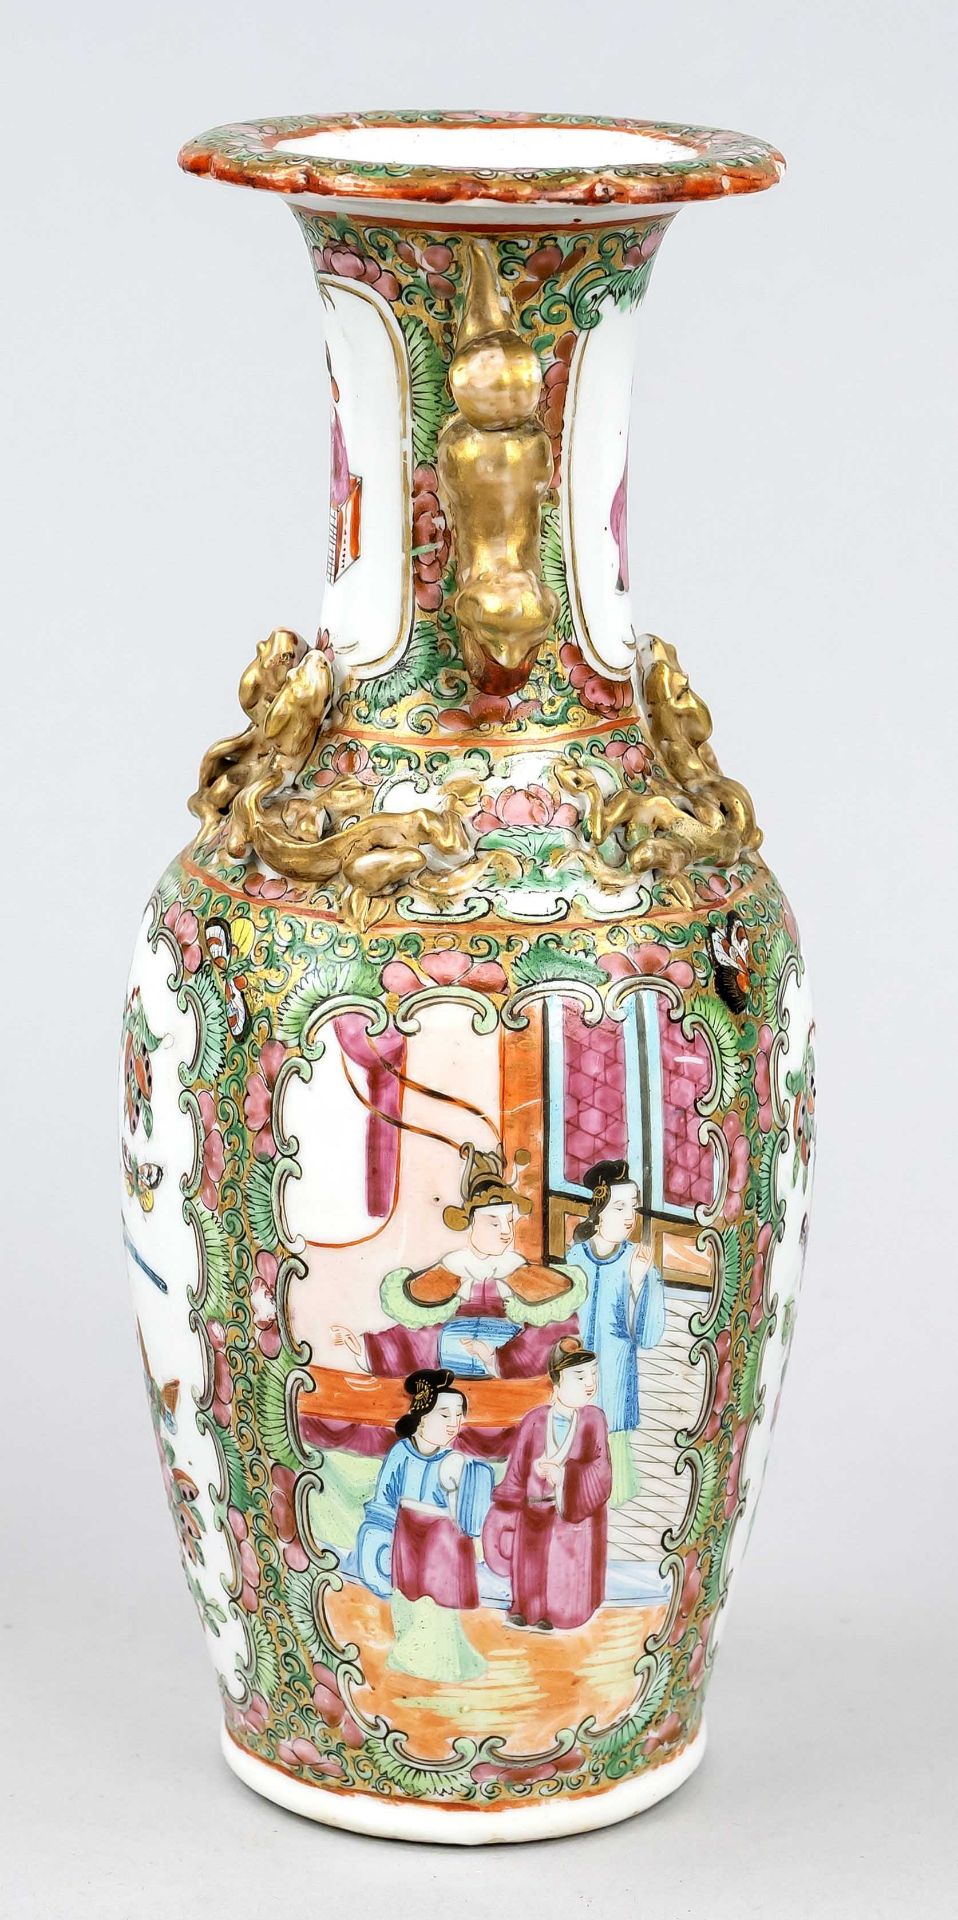 Canton flower vase famille rose, China, Qing dynasty(1644-1912), 19th century, porcelain with - Image 4 of 4